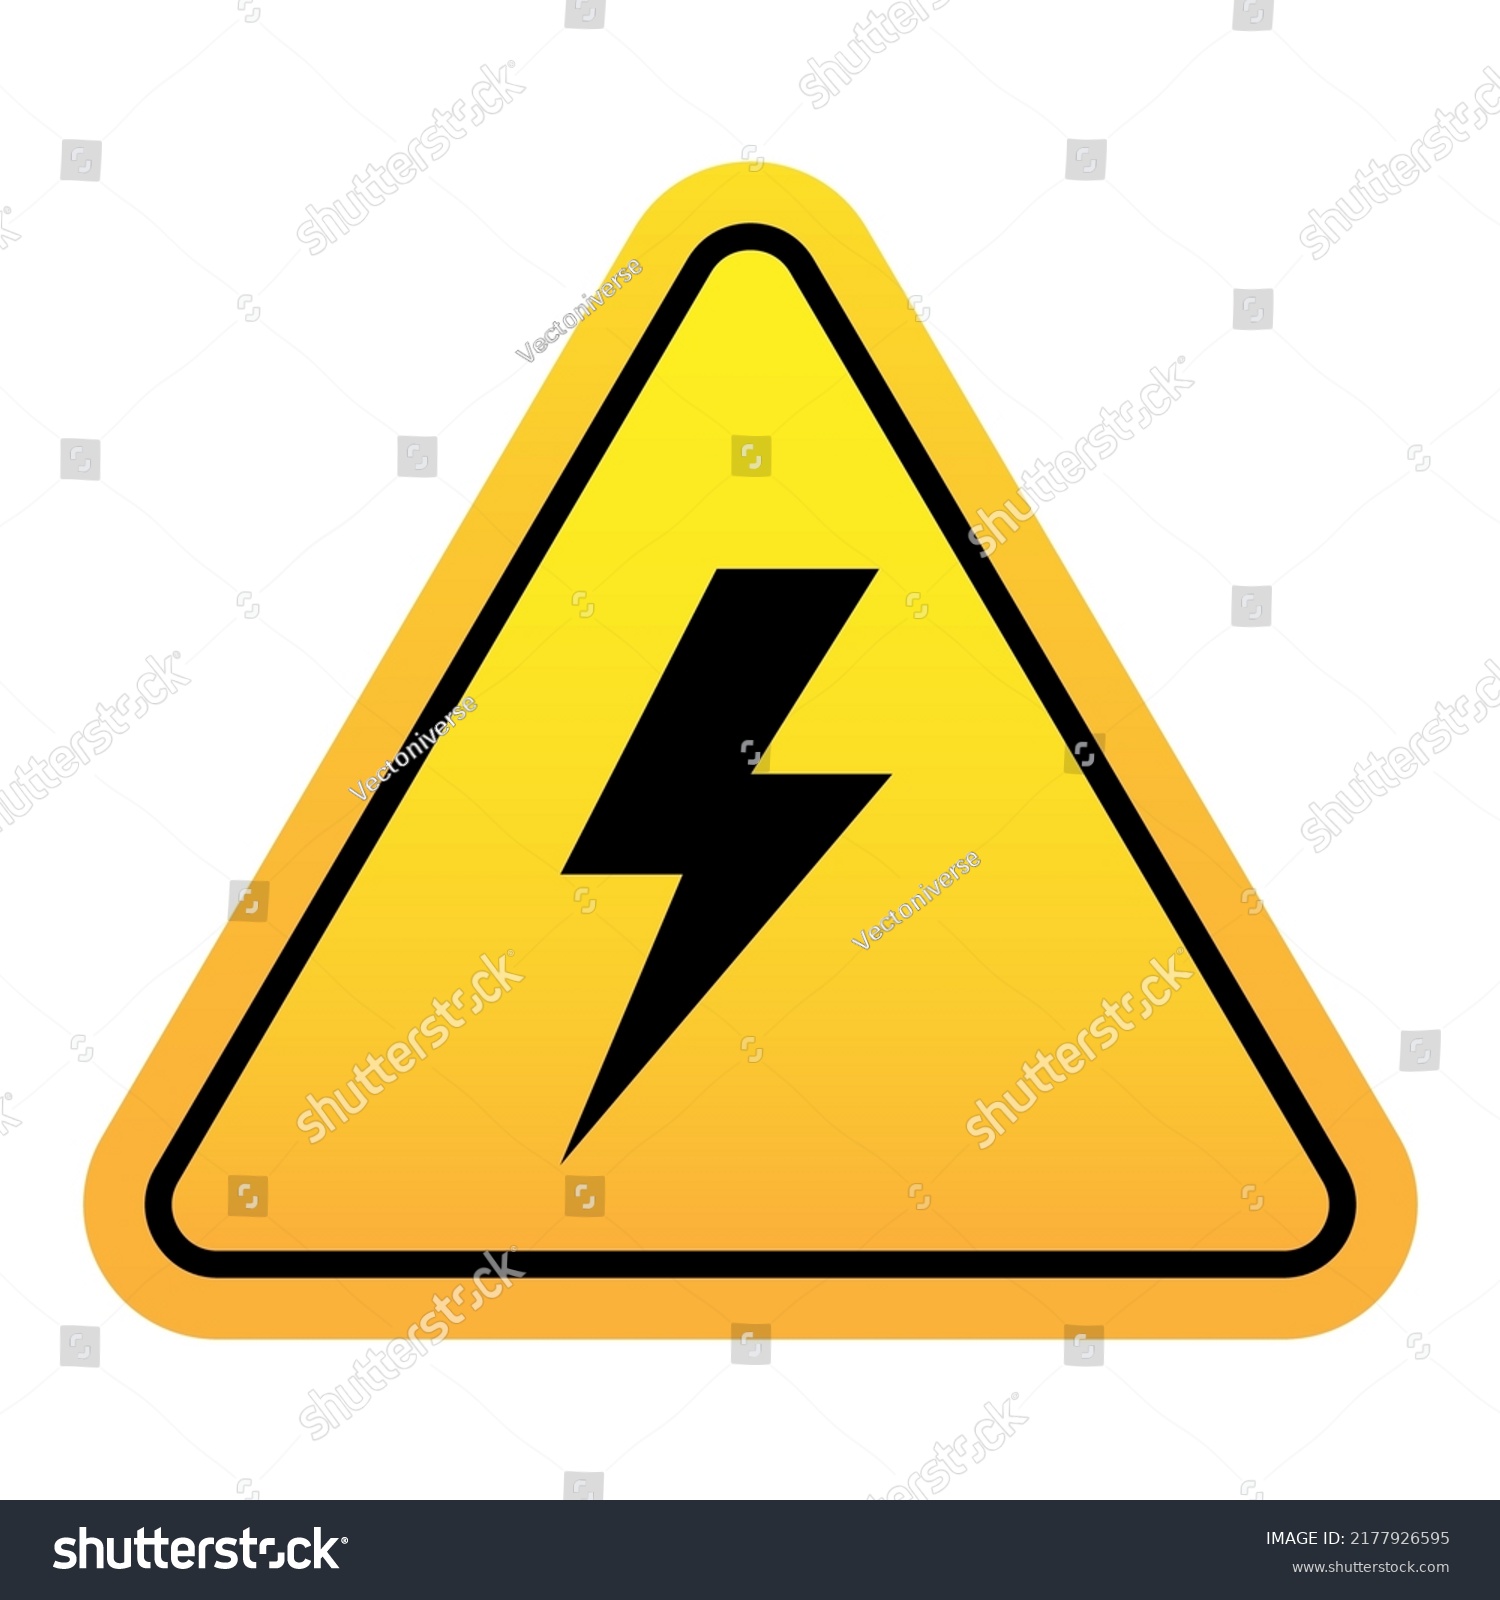 Electric Shock Hazard Vector Sign Isolated Stock Vector (Royalty Free ...